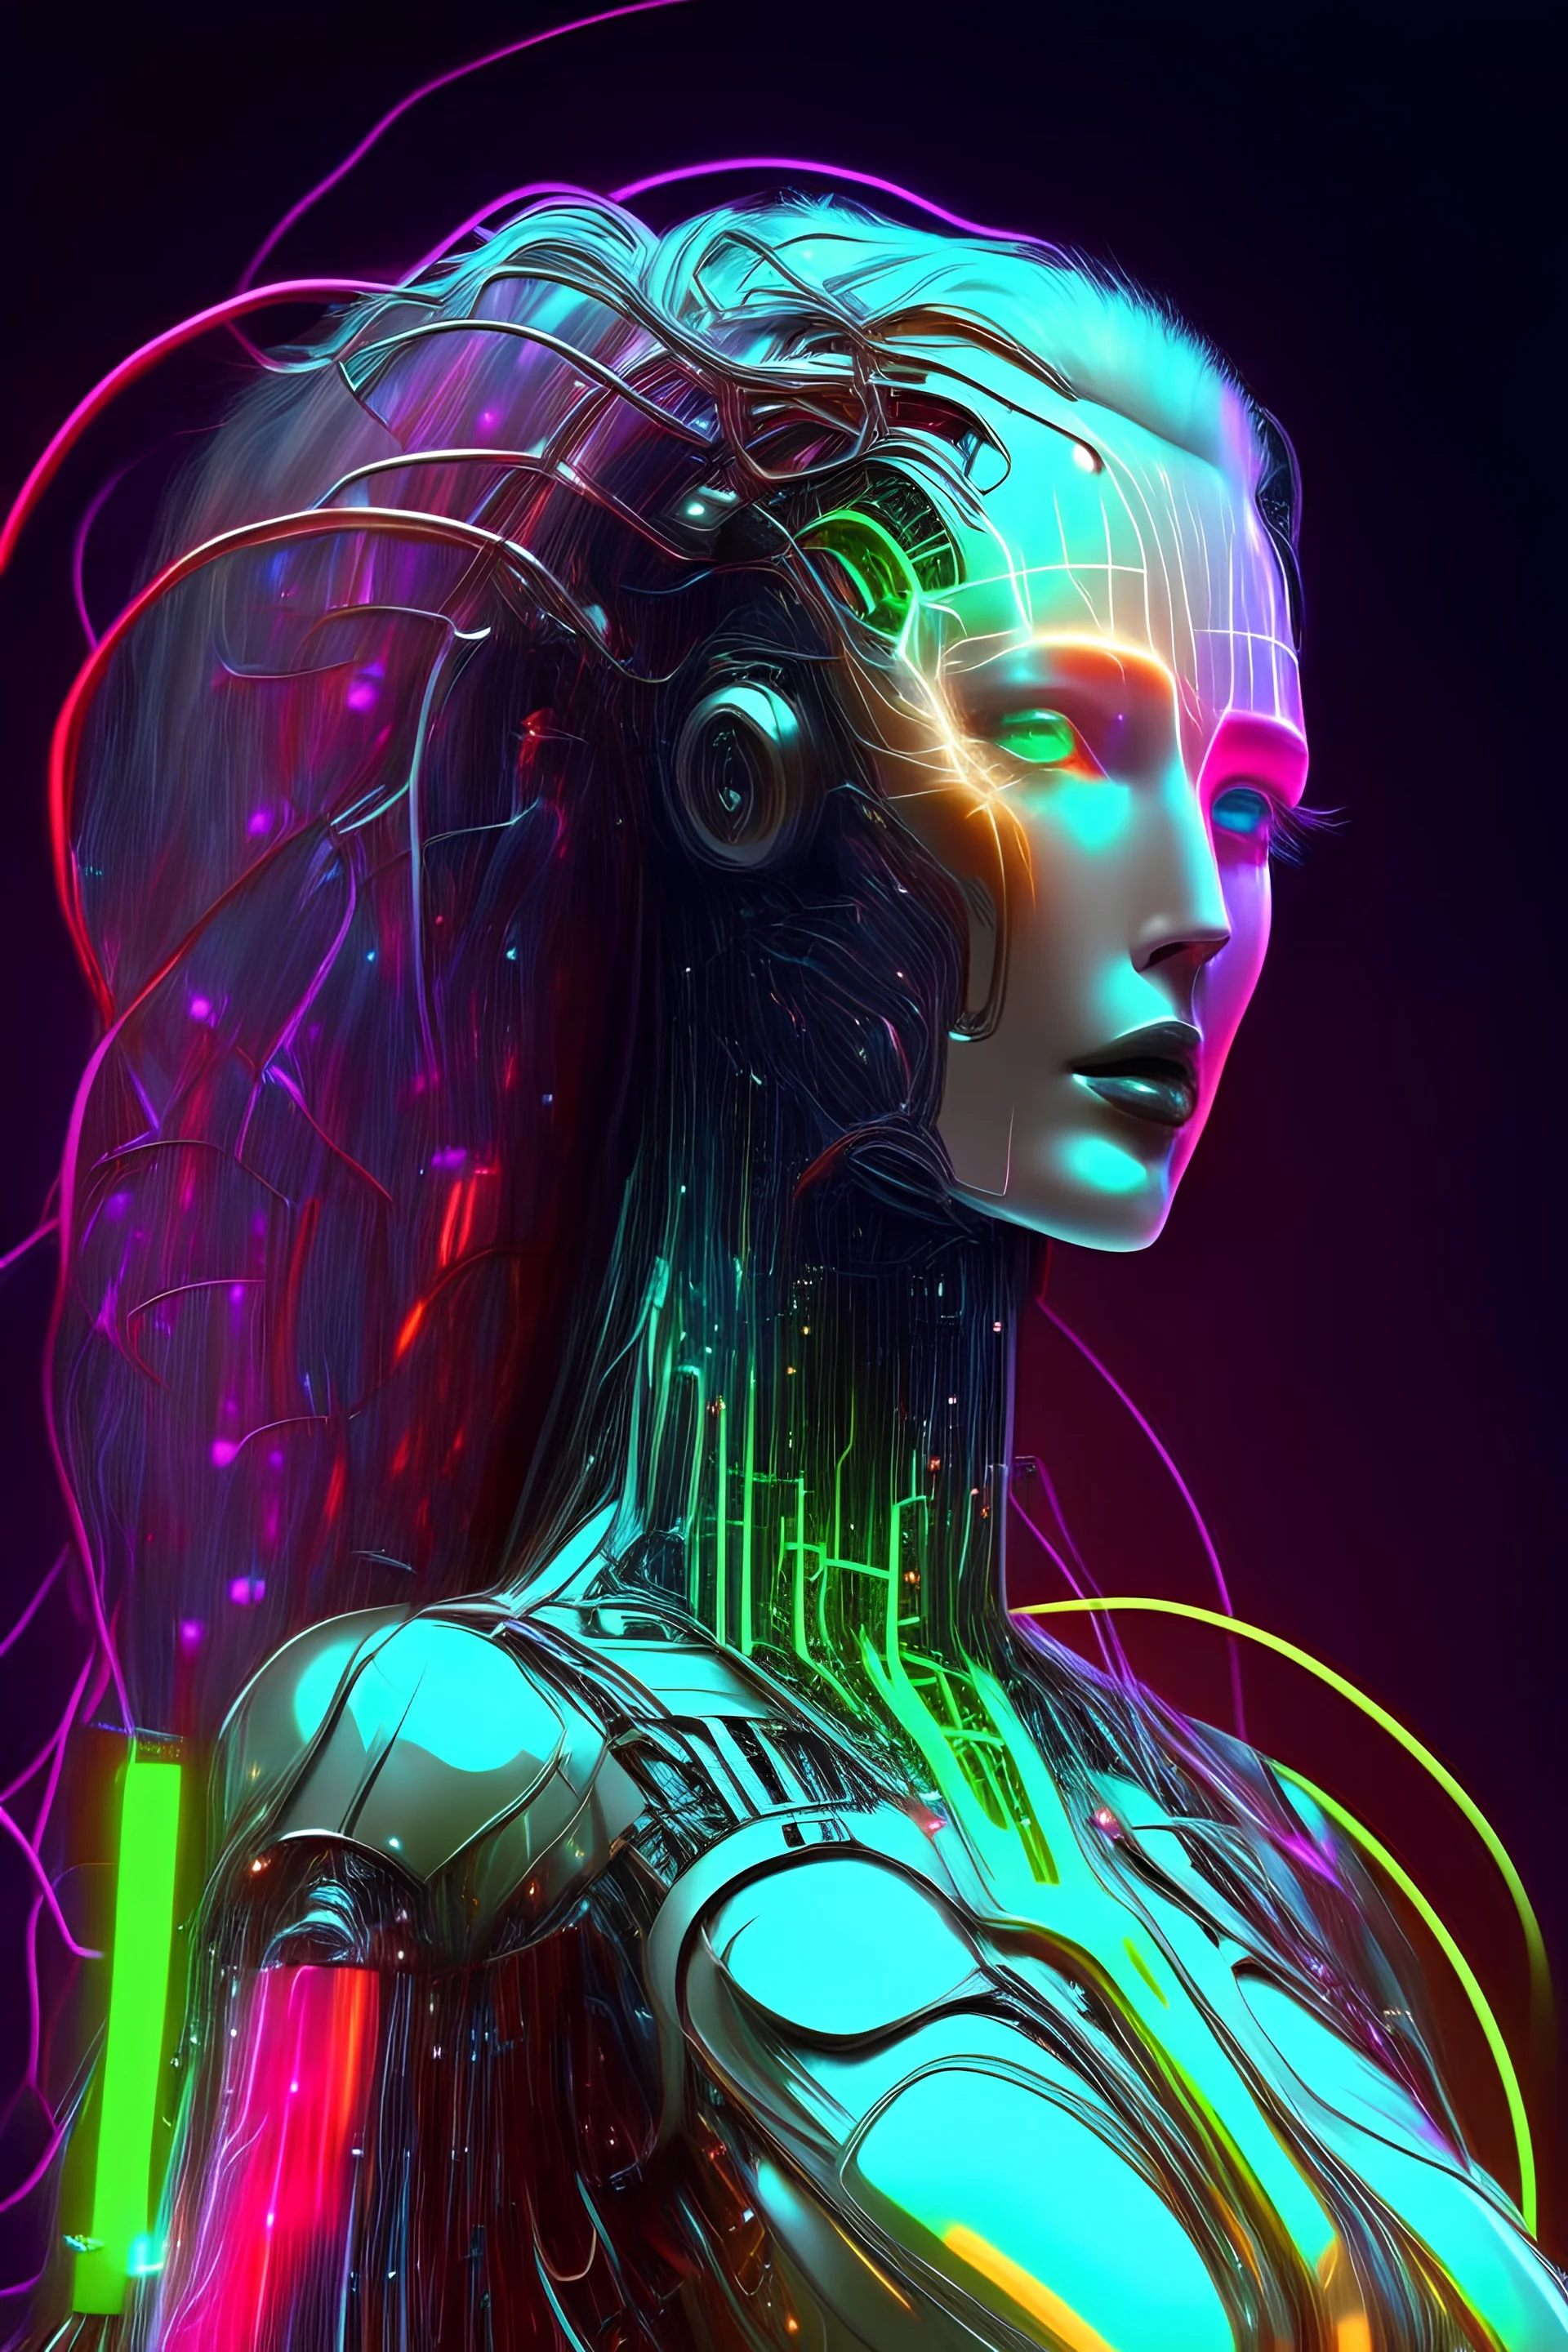 Optimus Ai Tesla robot female): iridescent green metal, red and gold optic fibre hair, robot, electric, neon, nebula, light shards, iridescent galaxy metal, glowing tendrils and threads for hair, electric wires, hair swirling and billowing, lighting effects, neon blue synth wave patterns, pearlescent, digital background, shiny